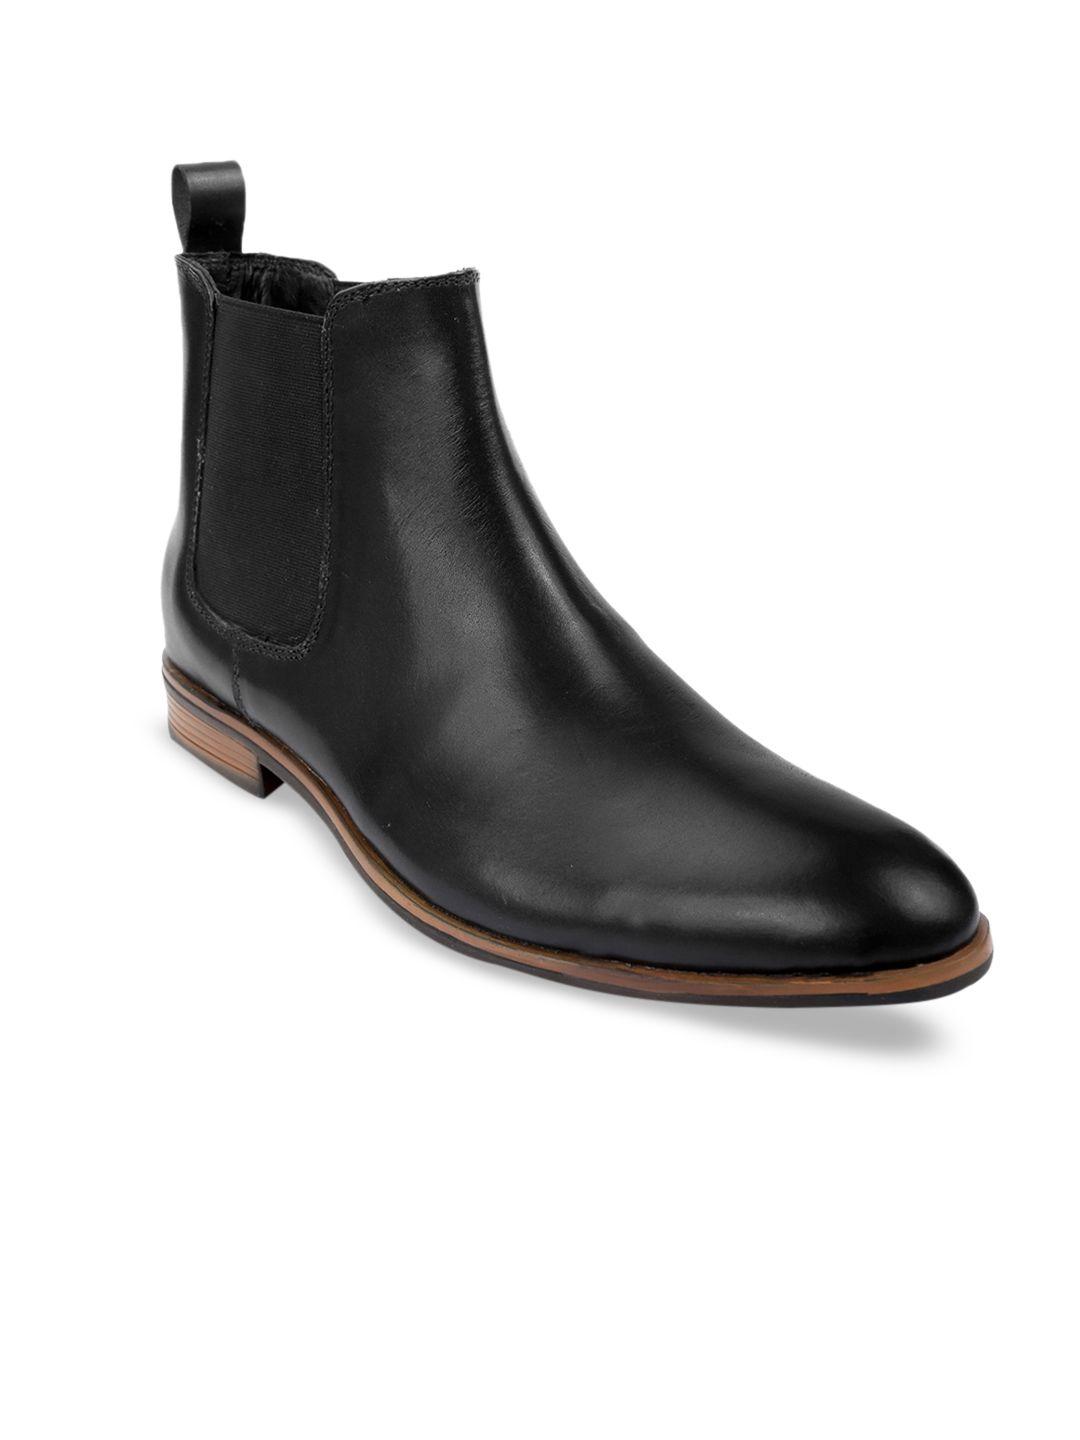 shences men black solid genuine leather mid-top lightweight chelsea boots